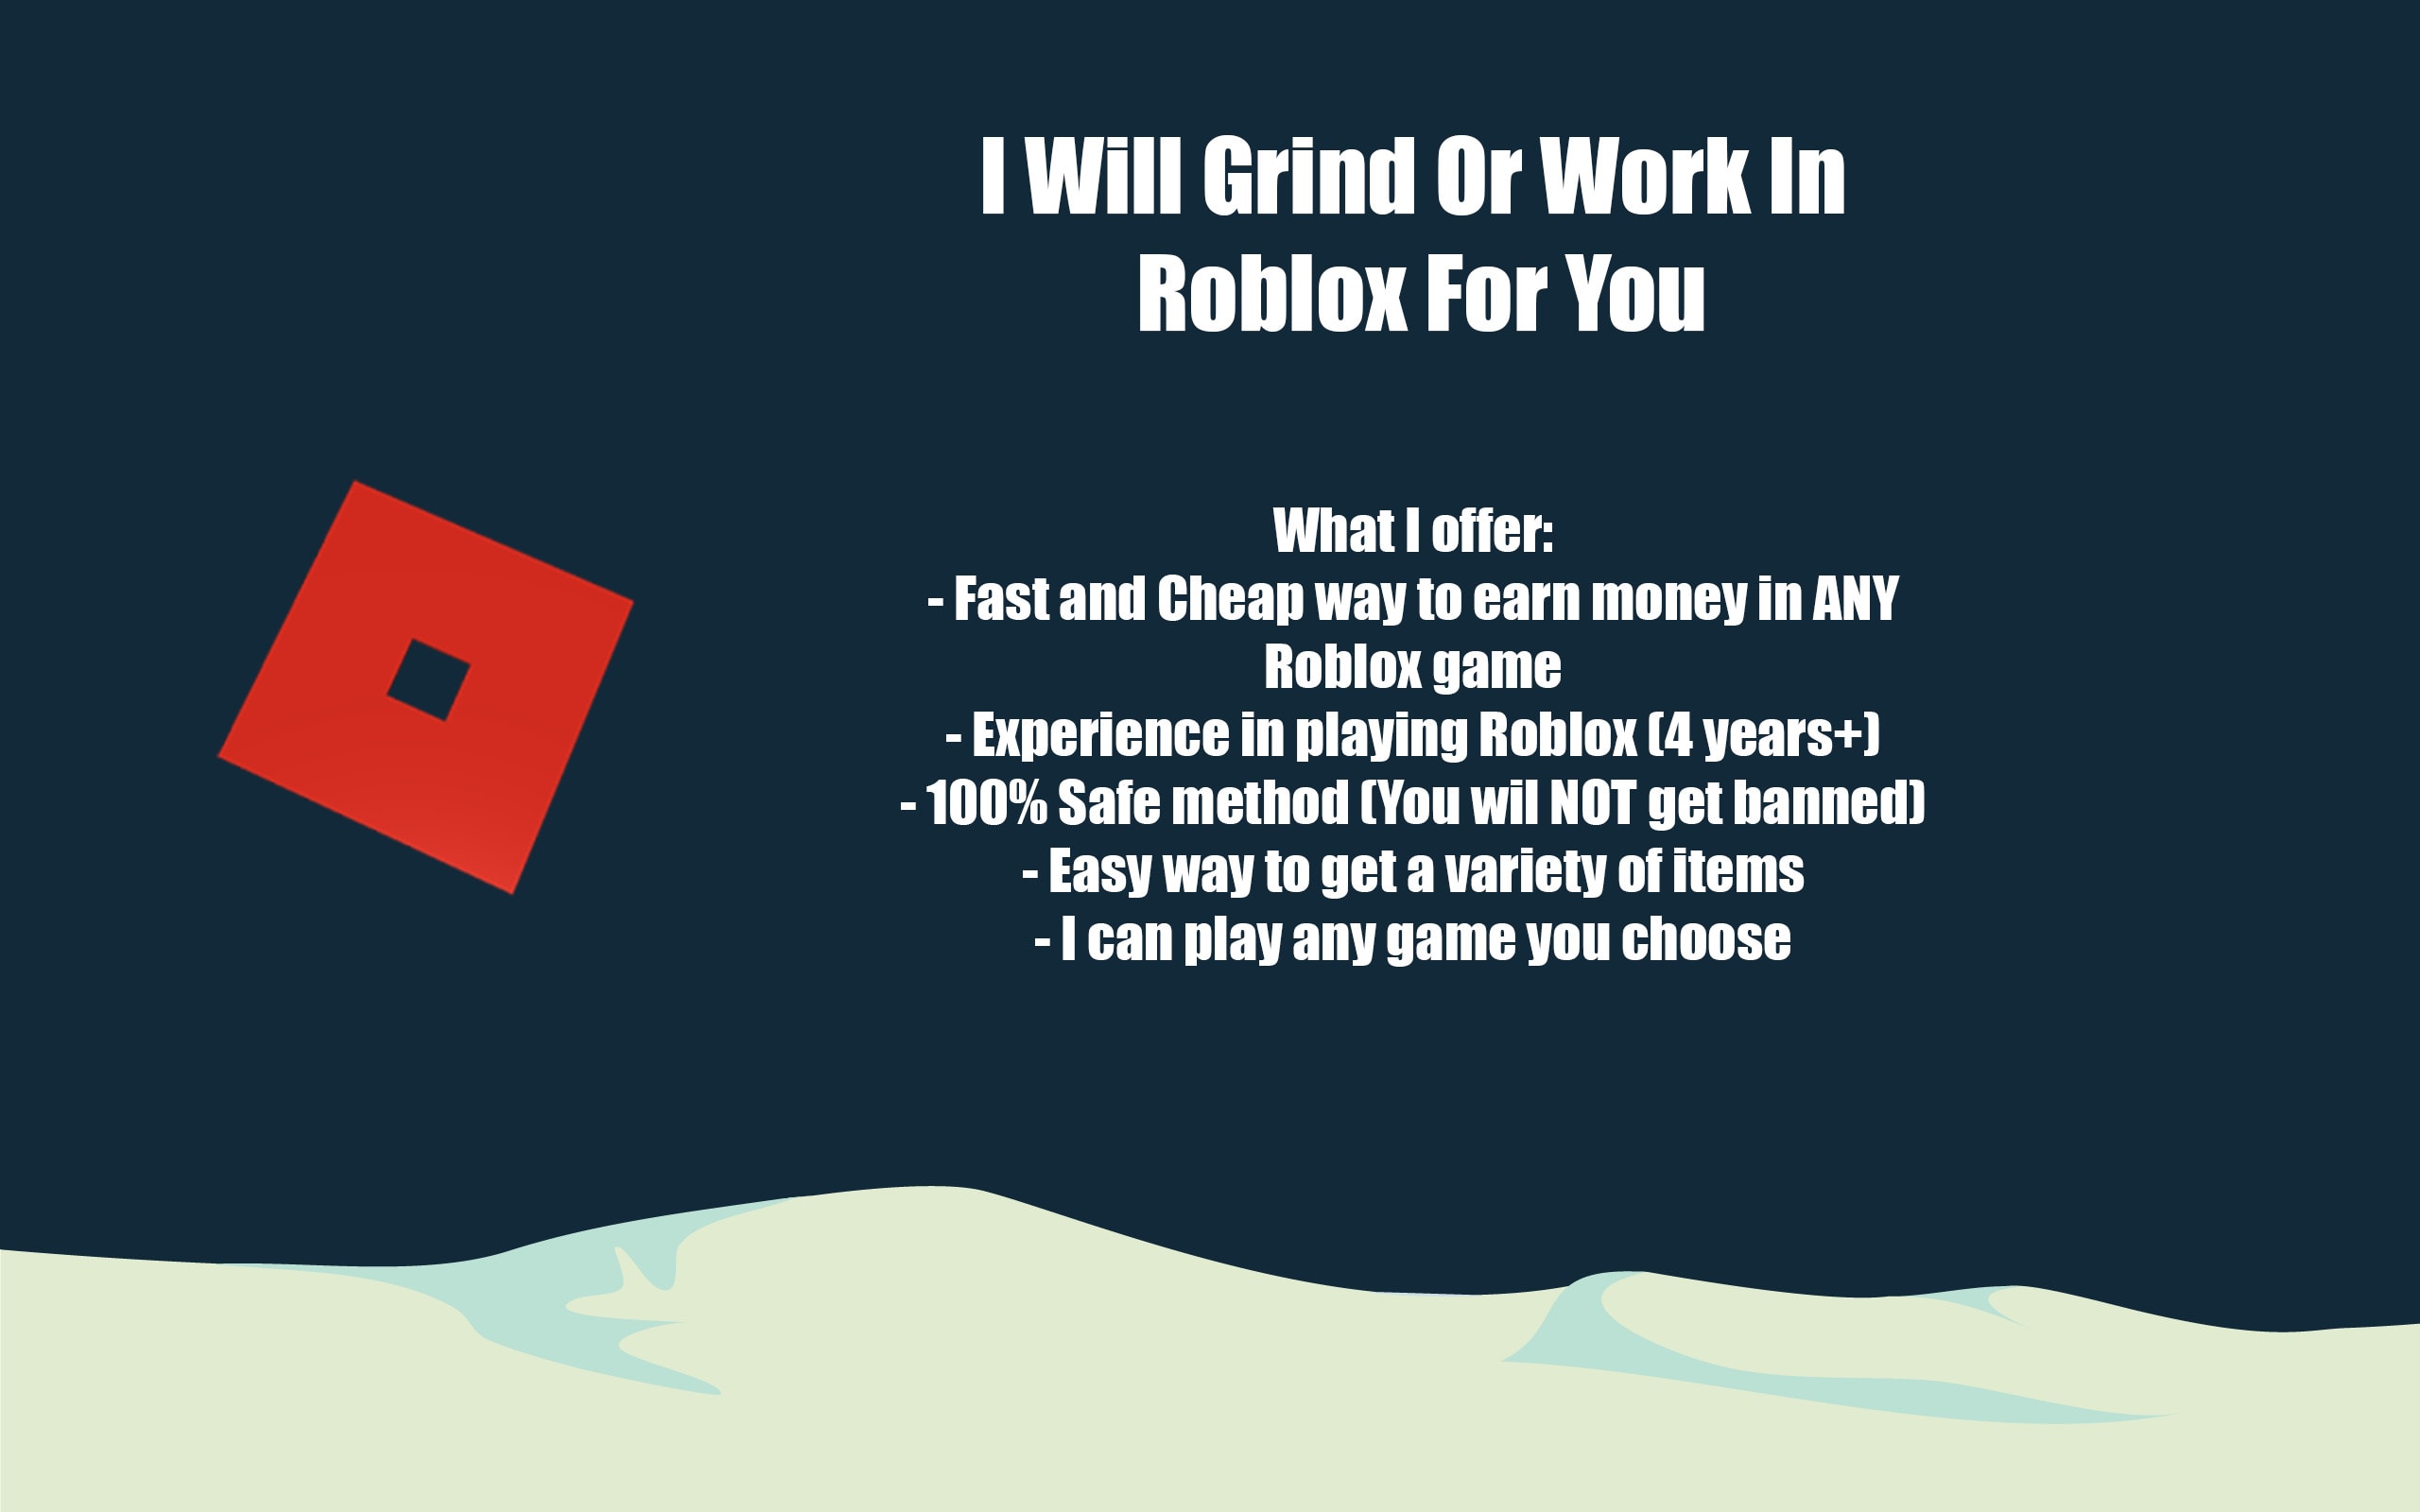 Grind Or Work In Roblox For You By Dzikuseq - roblox games real job